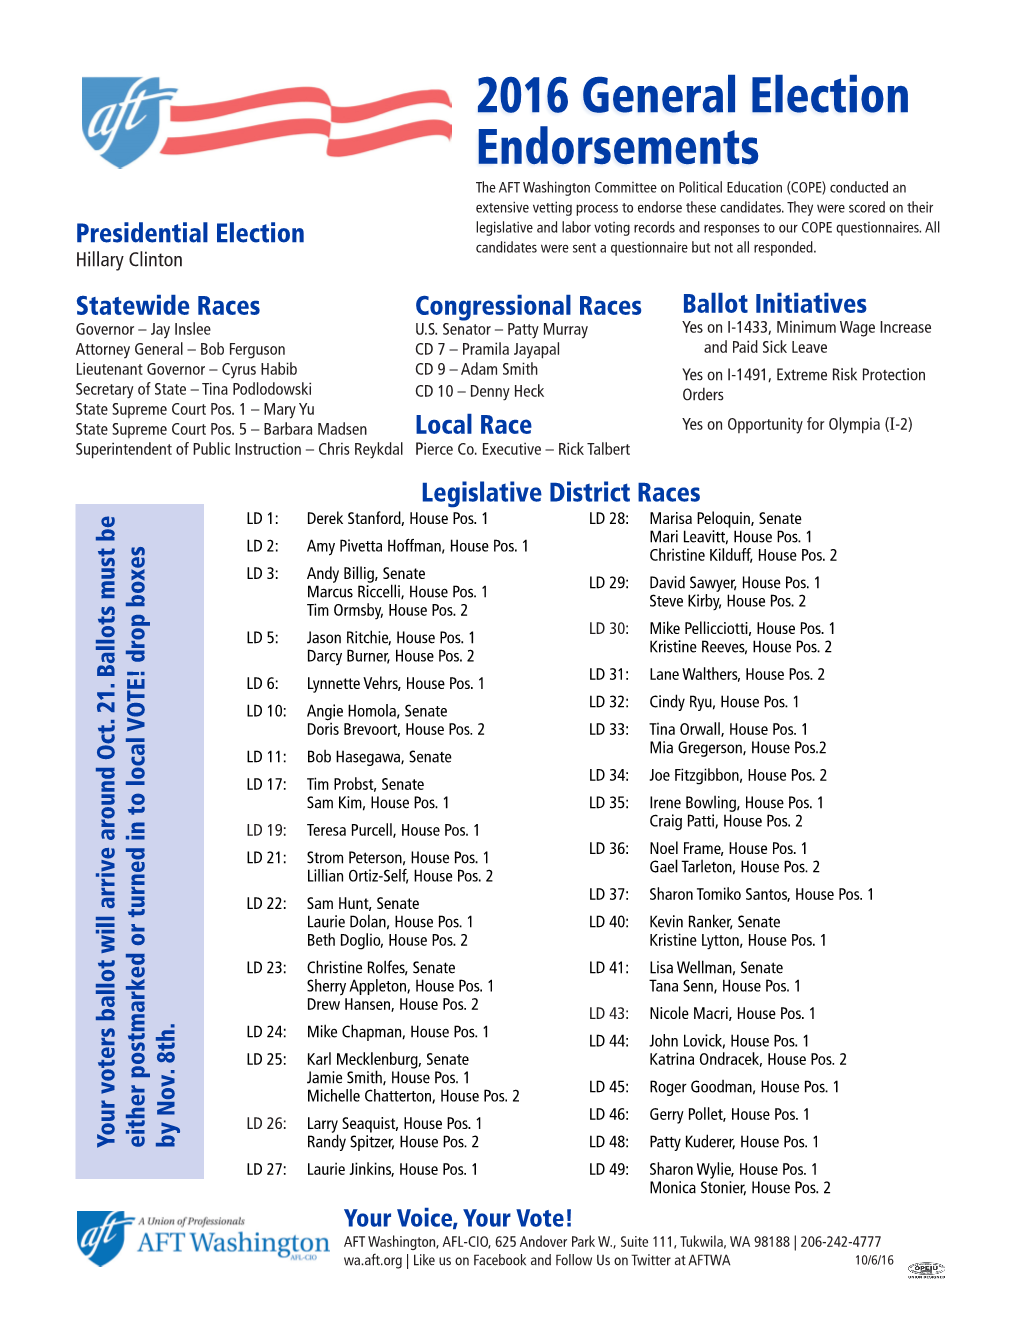 2016 General Election Endorsements the AFT Washington Committee on Political Education (COPE) Conducted an Extensive Vetting Process to Endorse These Candidates